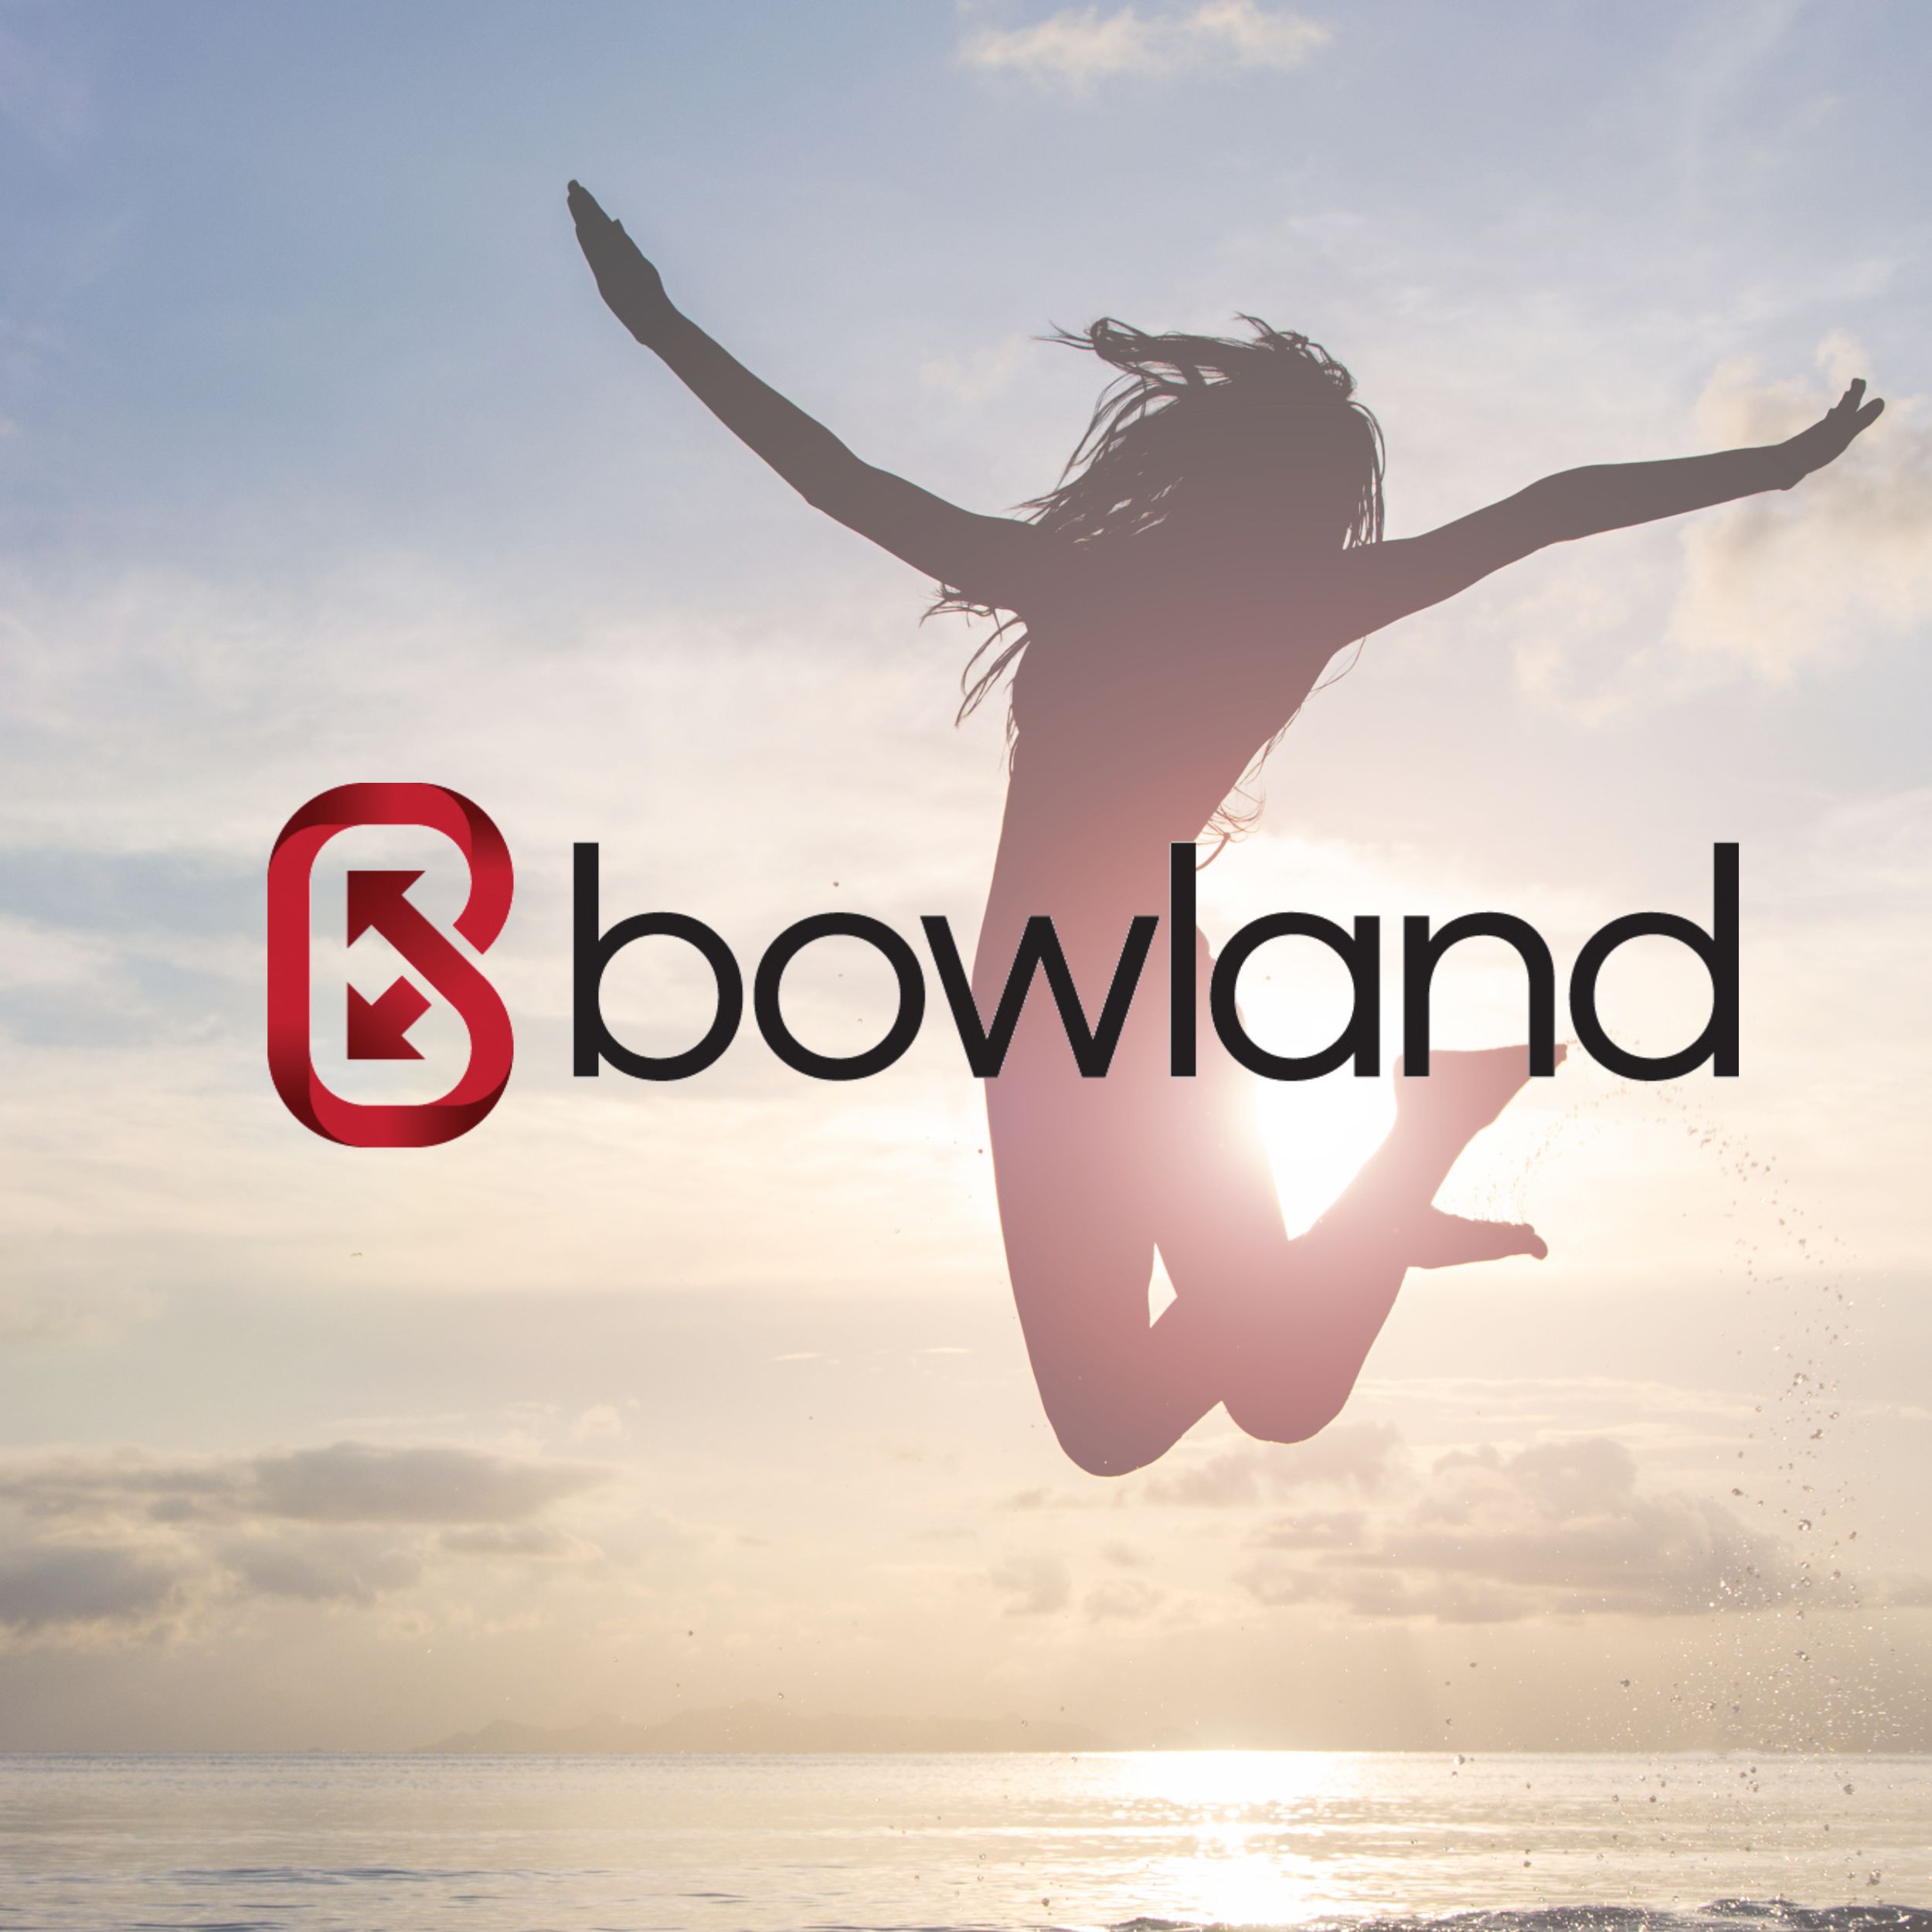 Invest in EASY, STRAIGHT FORWARD and PAINLESS Business IT FREEDOM with Bowland IT